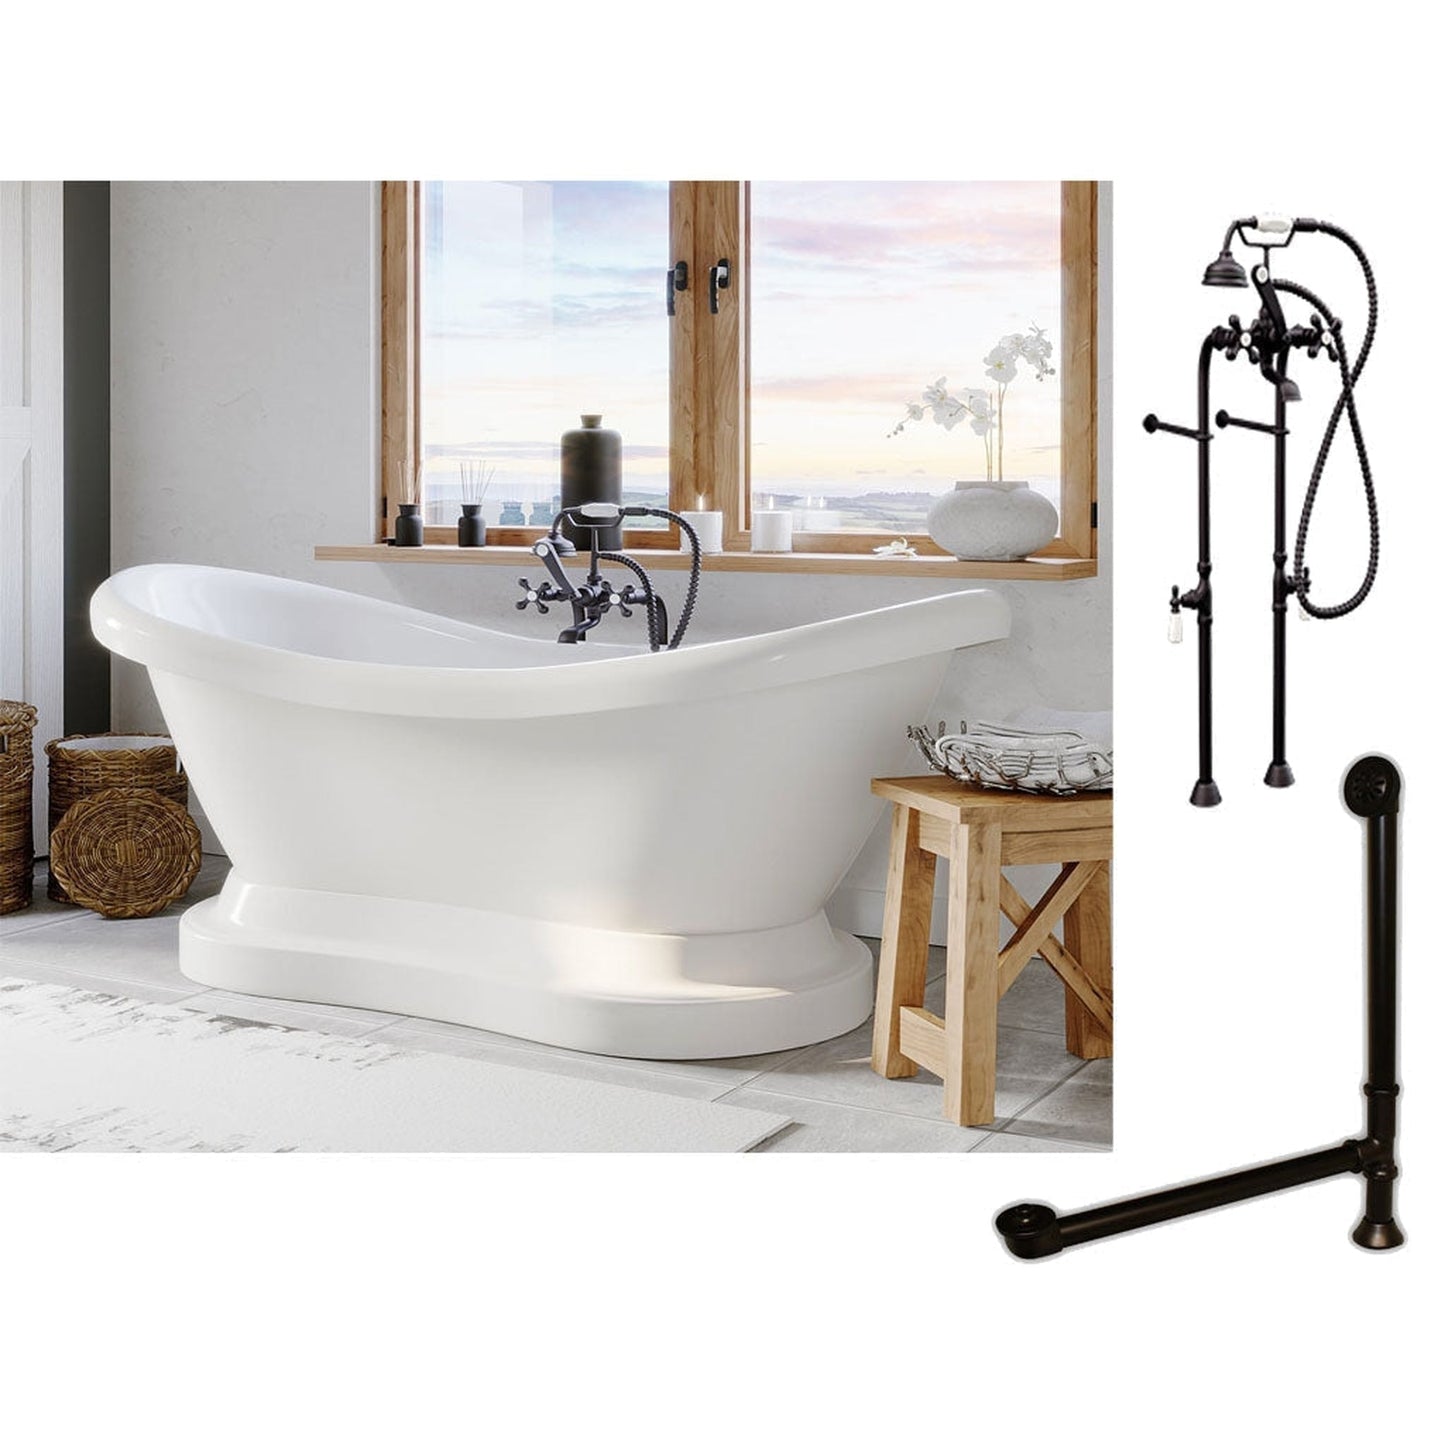 Cambridge Plumbing 69" White Double Slipper Pedestal Acrylic Bathtub With No Deck Holes And Complete Plumbing Package Including Floor Mounted British Telephone Faucet, Drain And Overflow Assembly In Oil Rubbed Bronze